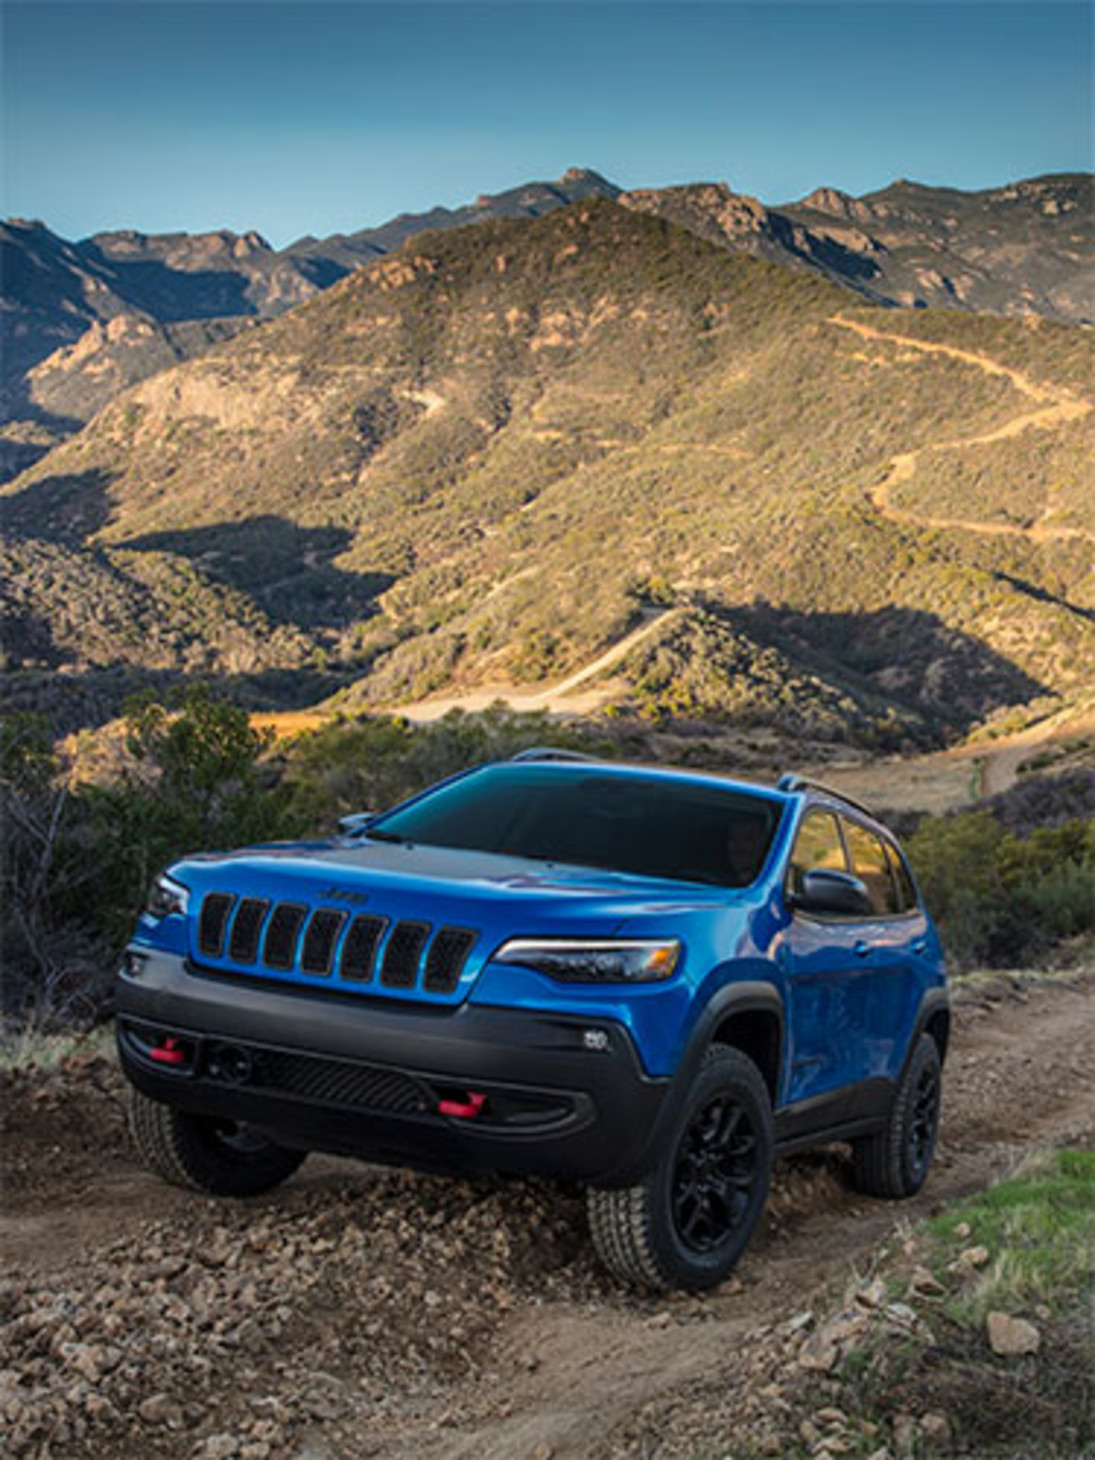 An angled view of a blue Cherokee being driven up a mountain.